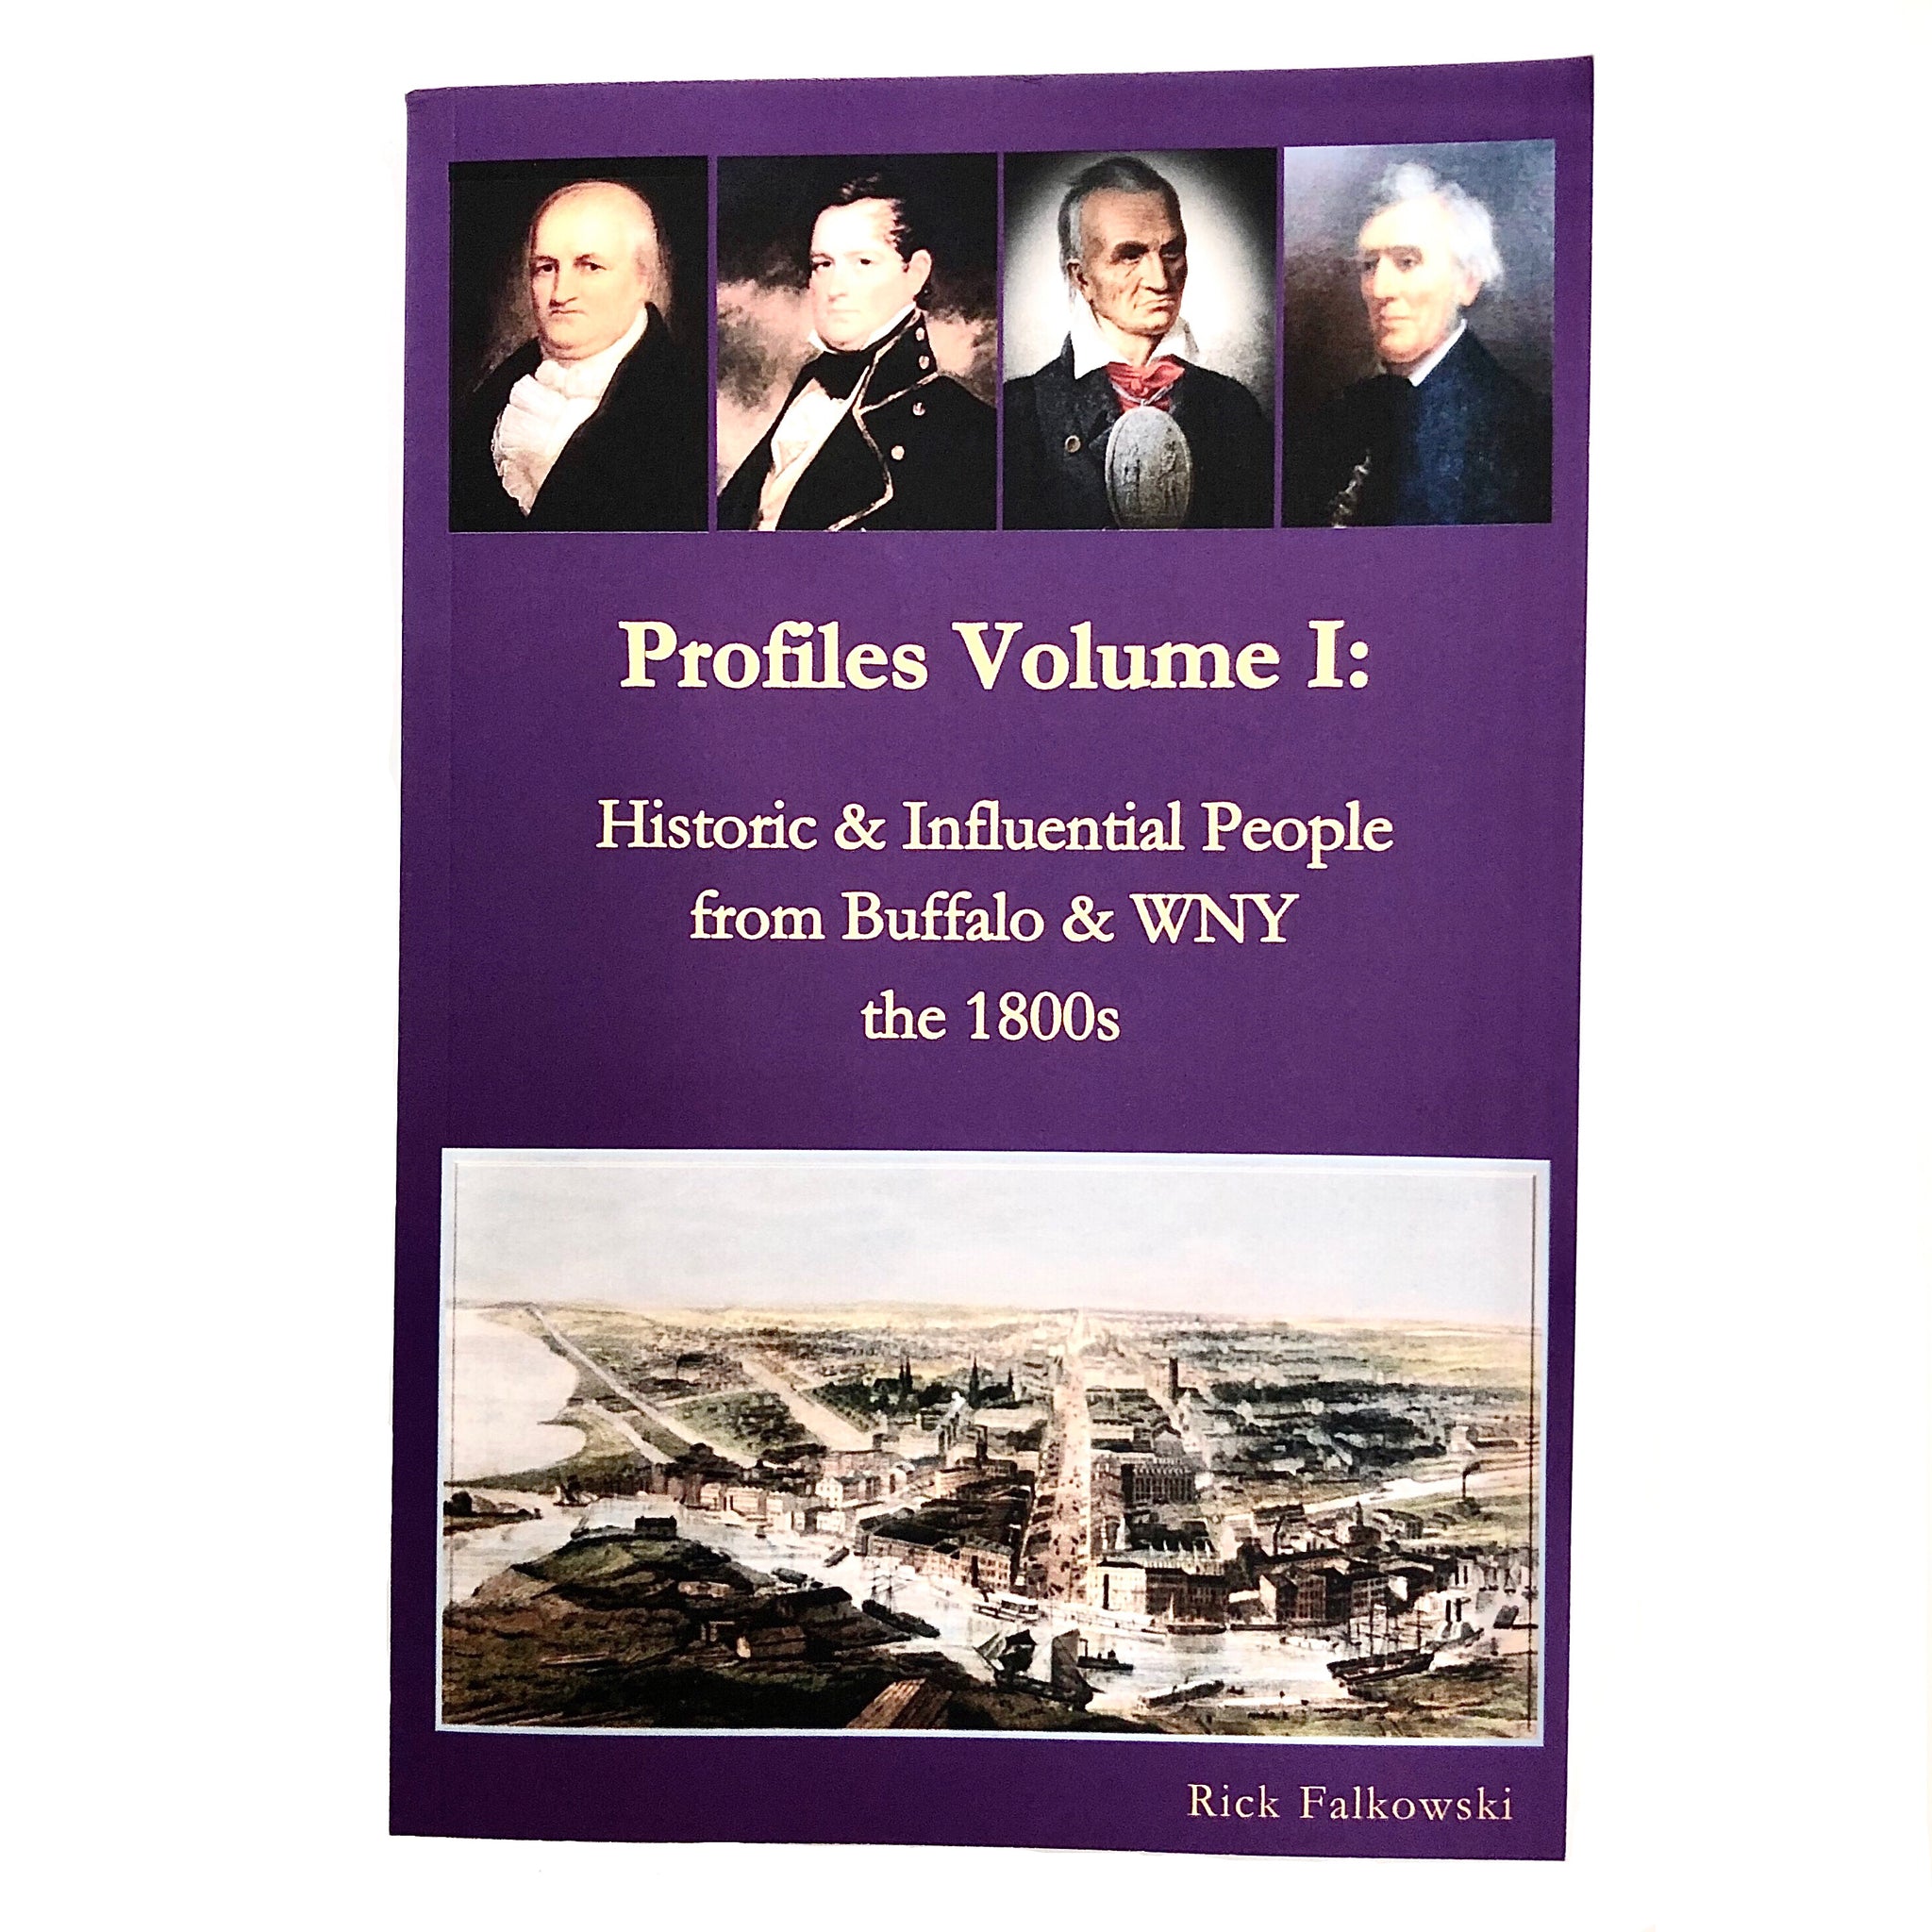 "Profiles Volume I: Historical & Influential People From Buffalo & WNY - the 1800s" Book